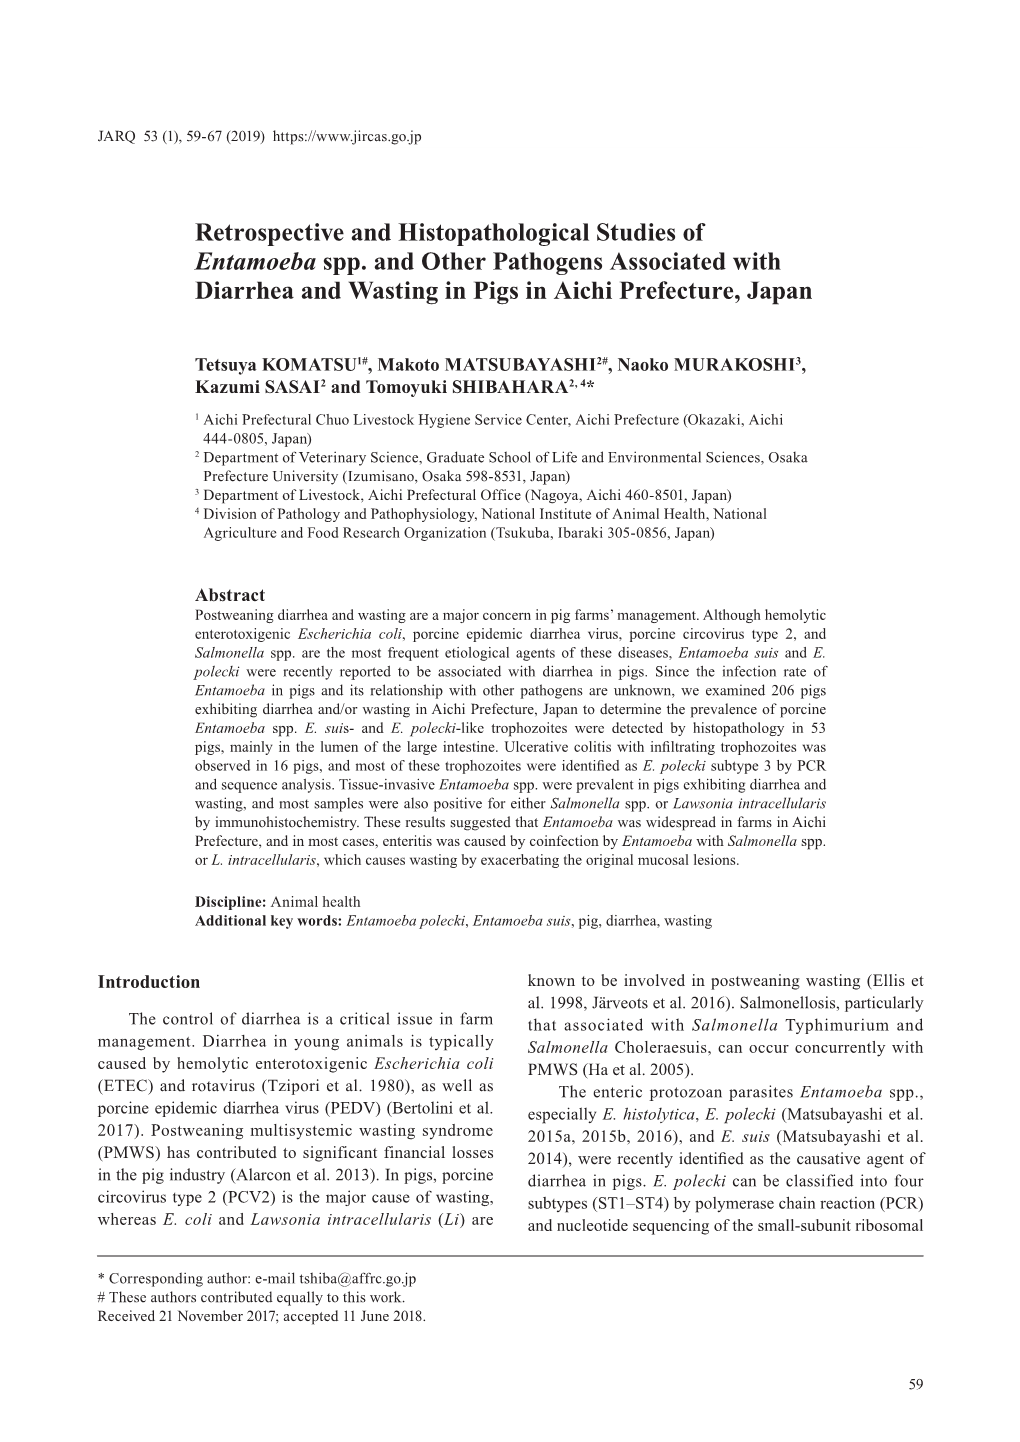 Retrospective and Histopathological Studies of Entamoeba Spp. and Other Pathogens Associated with Diarrhea and Wasting in Pigs in Aichi Prefecture, Japan